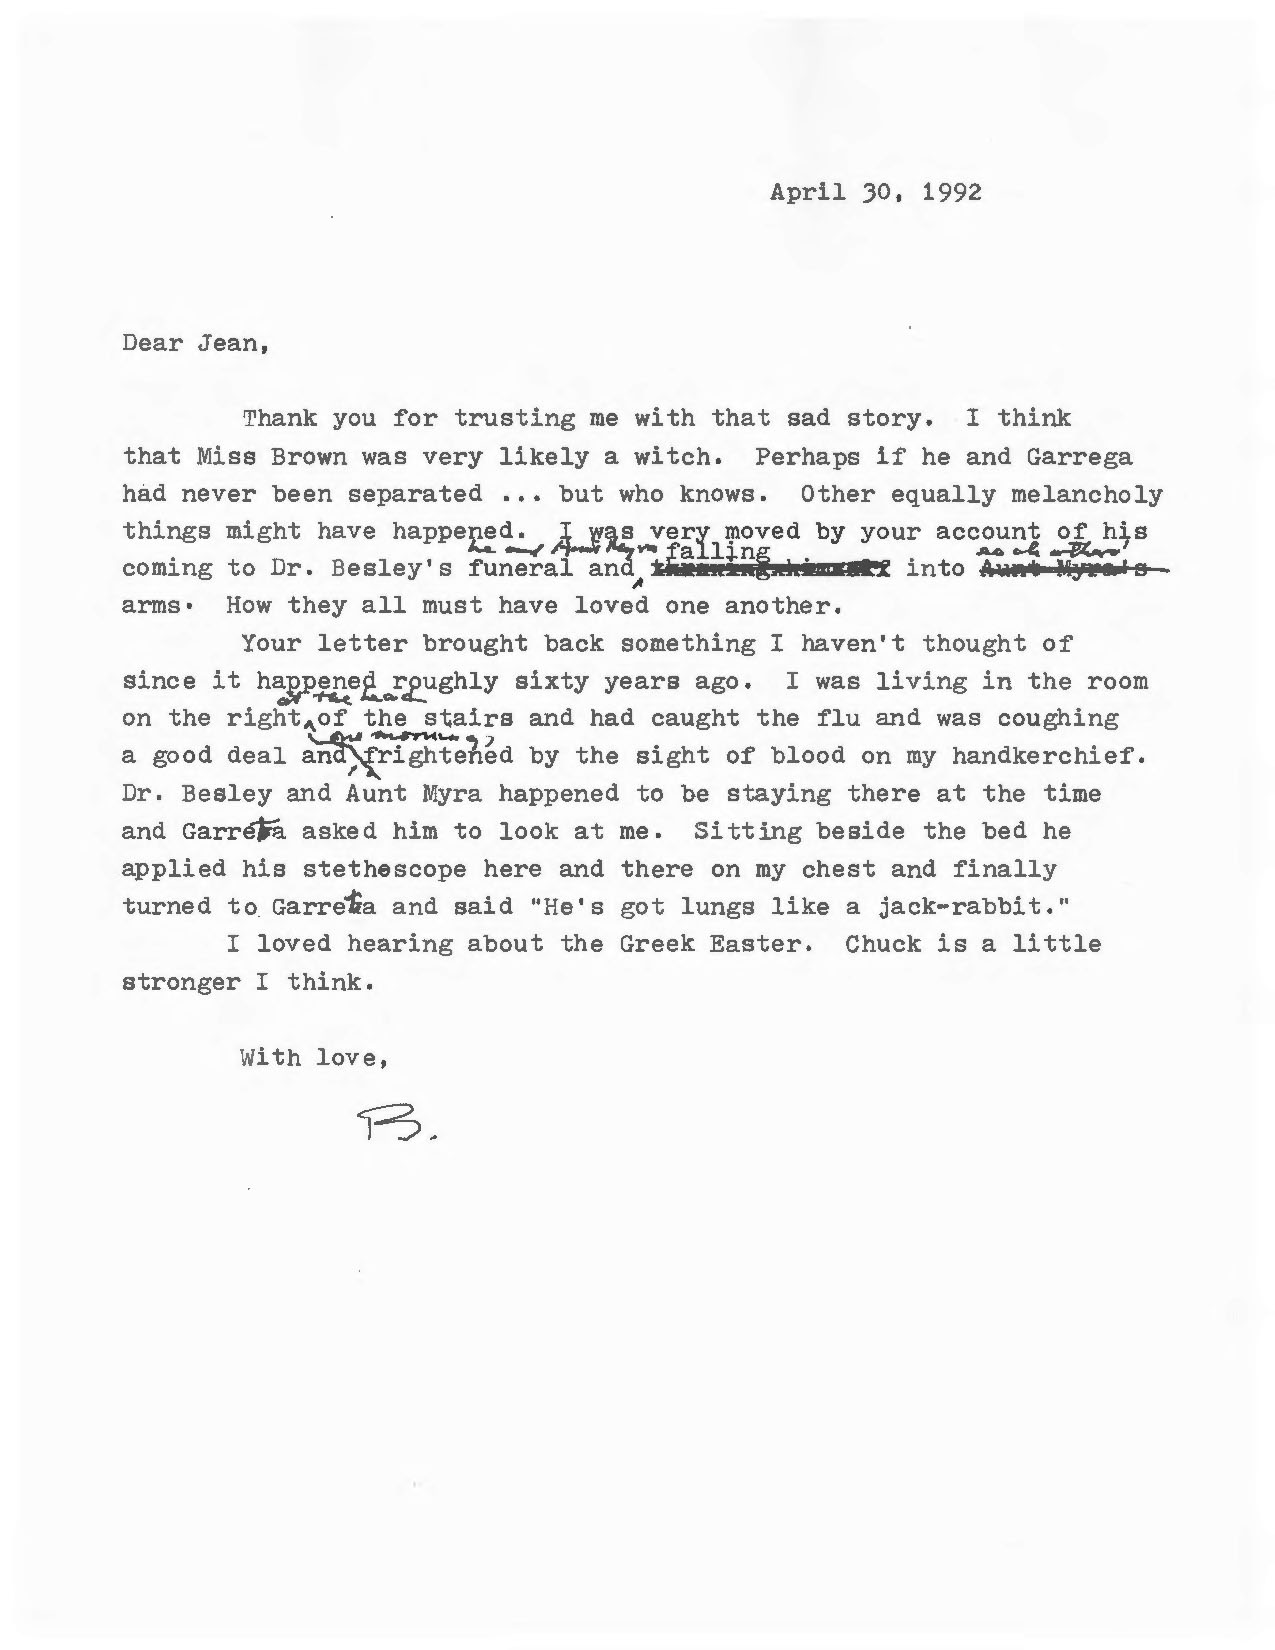 Letter from William Maxwell to regarding 1918 flu pandemic, April 30, 1992. 